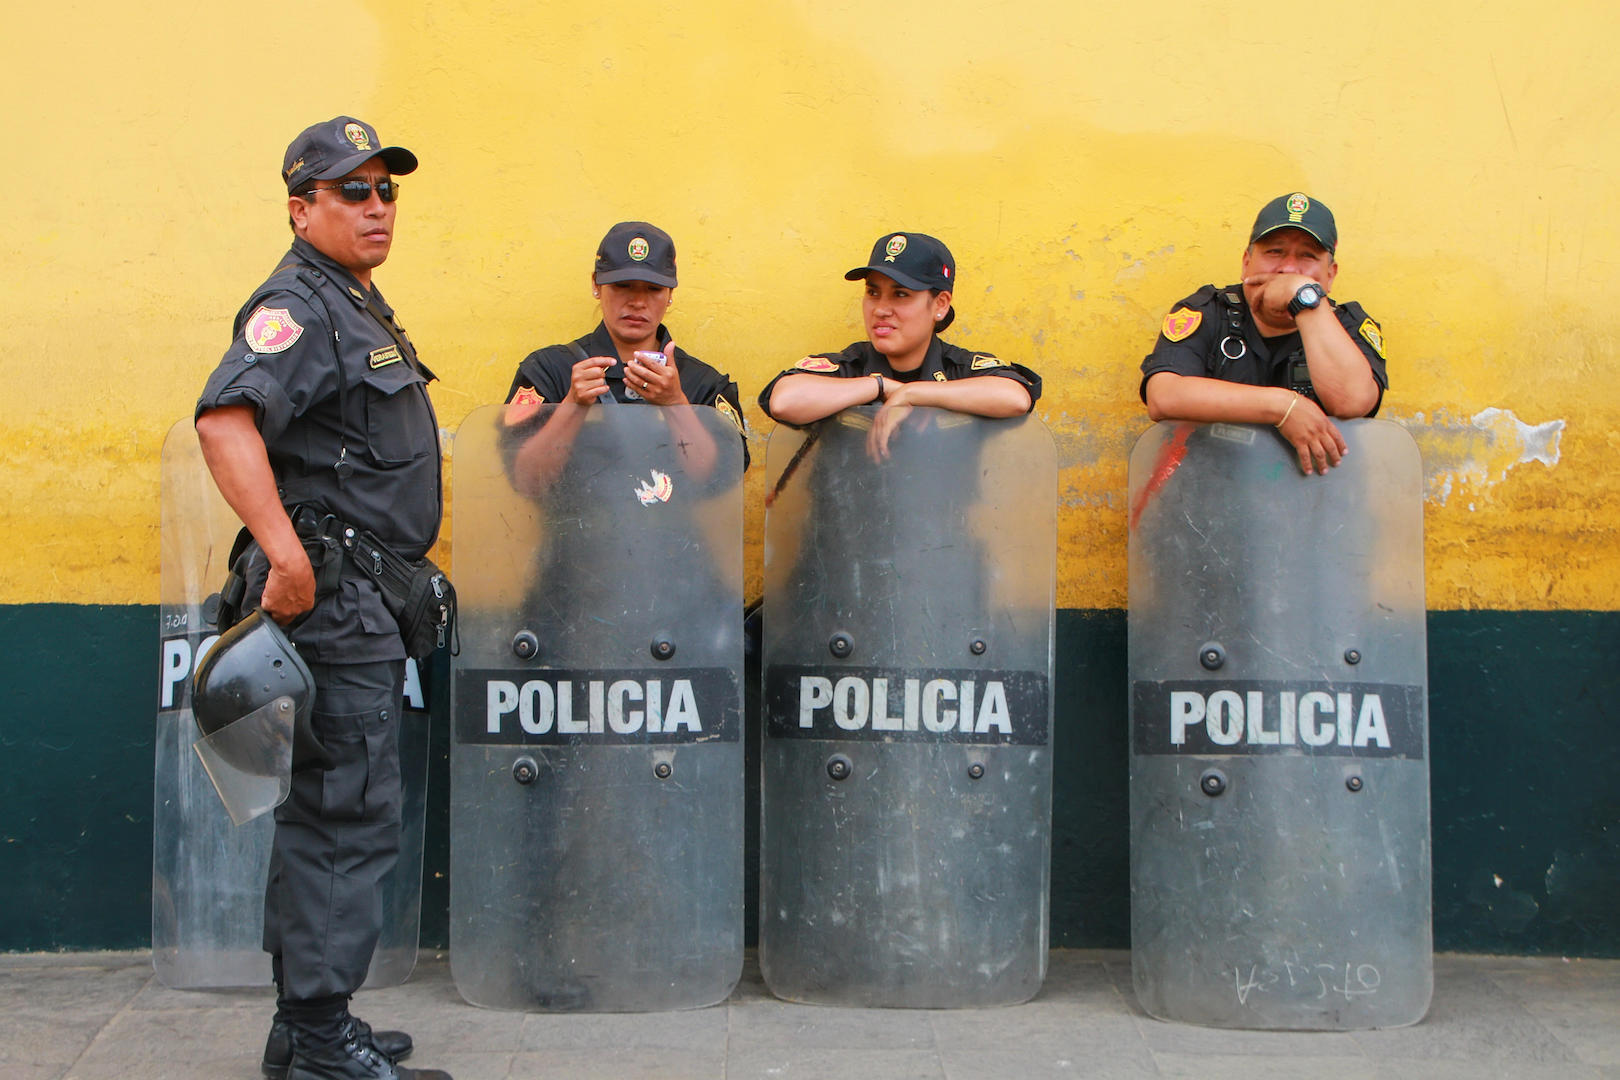 <p>Since 2006, Peru&#8217;s police has been permitted to provide security services to private companies (image: Alamy)</p>